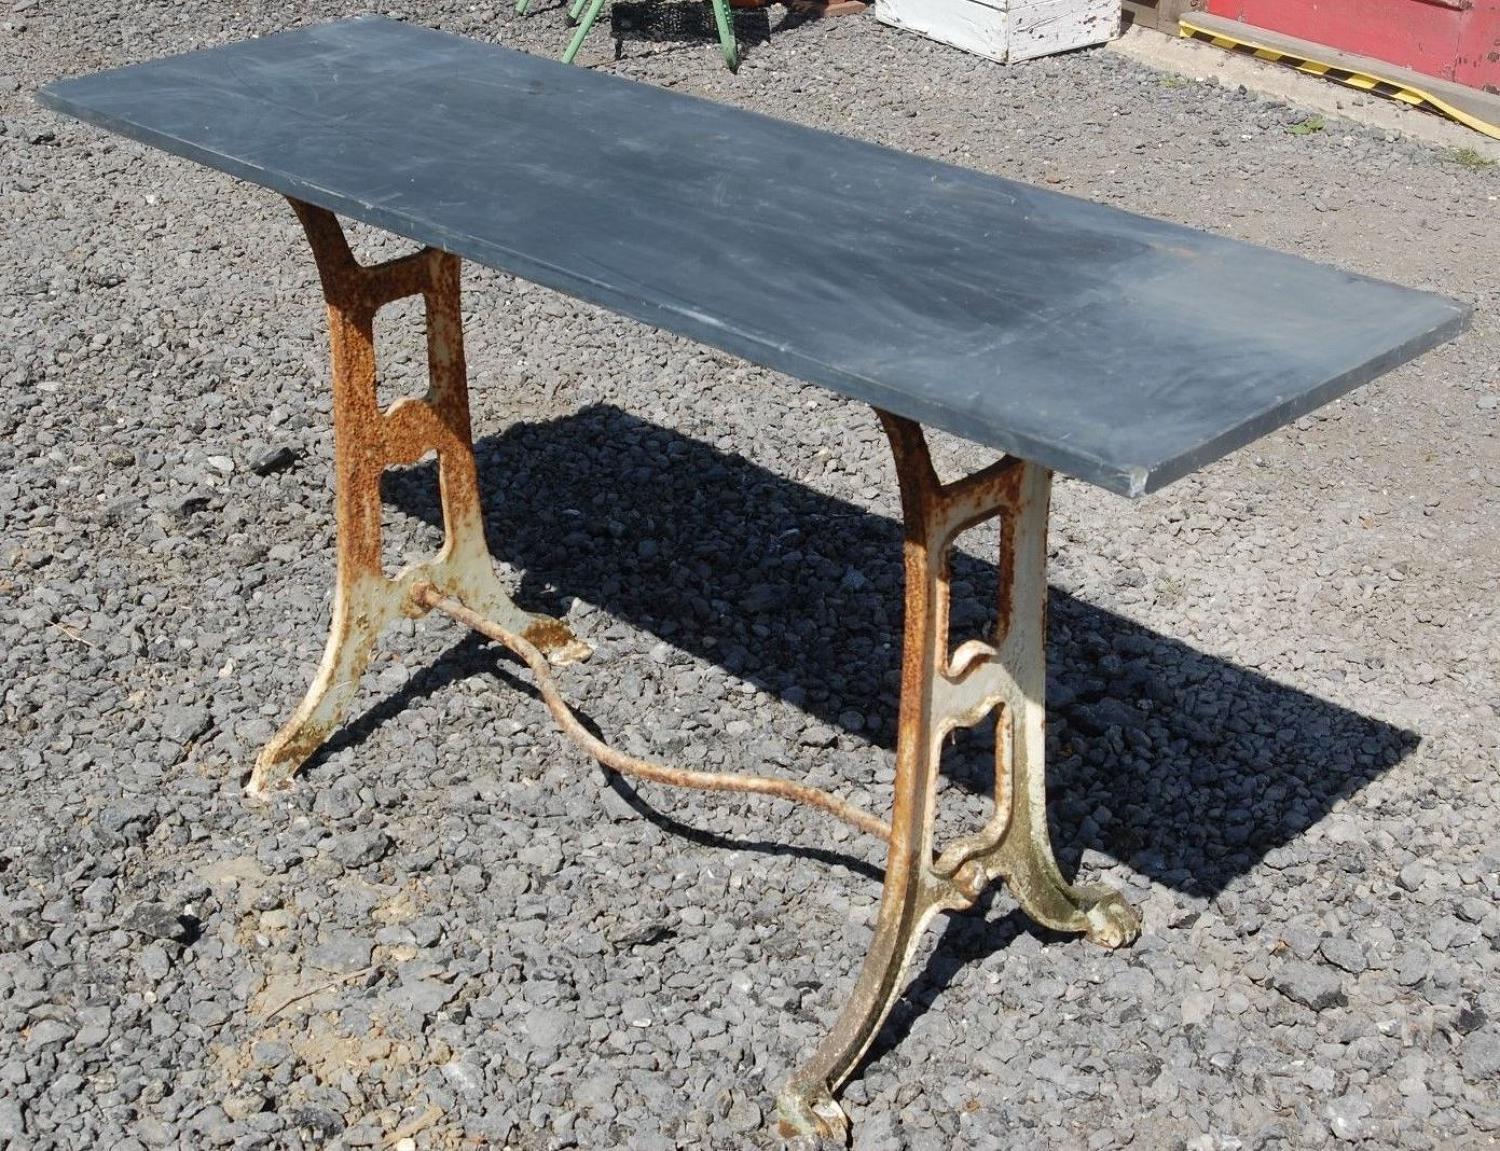 Slate topped garden table on cast iron singer sewing machine base